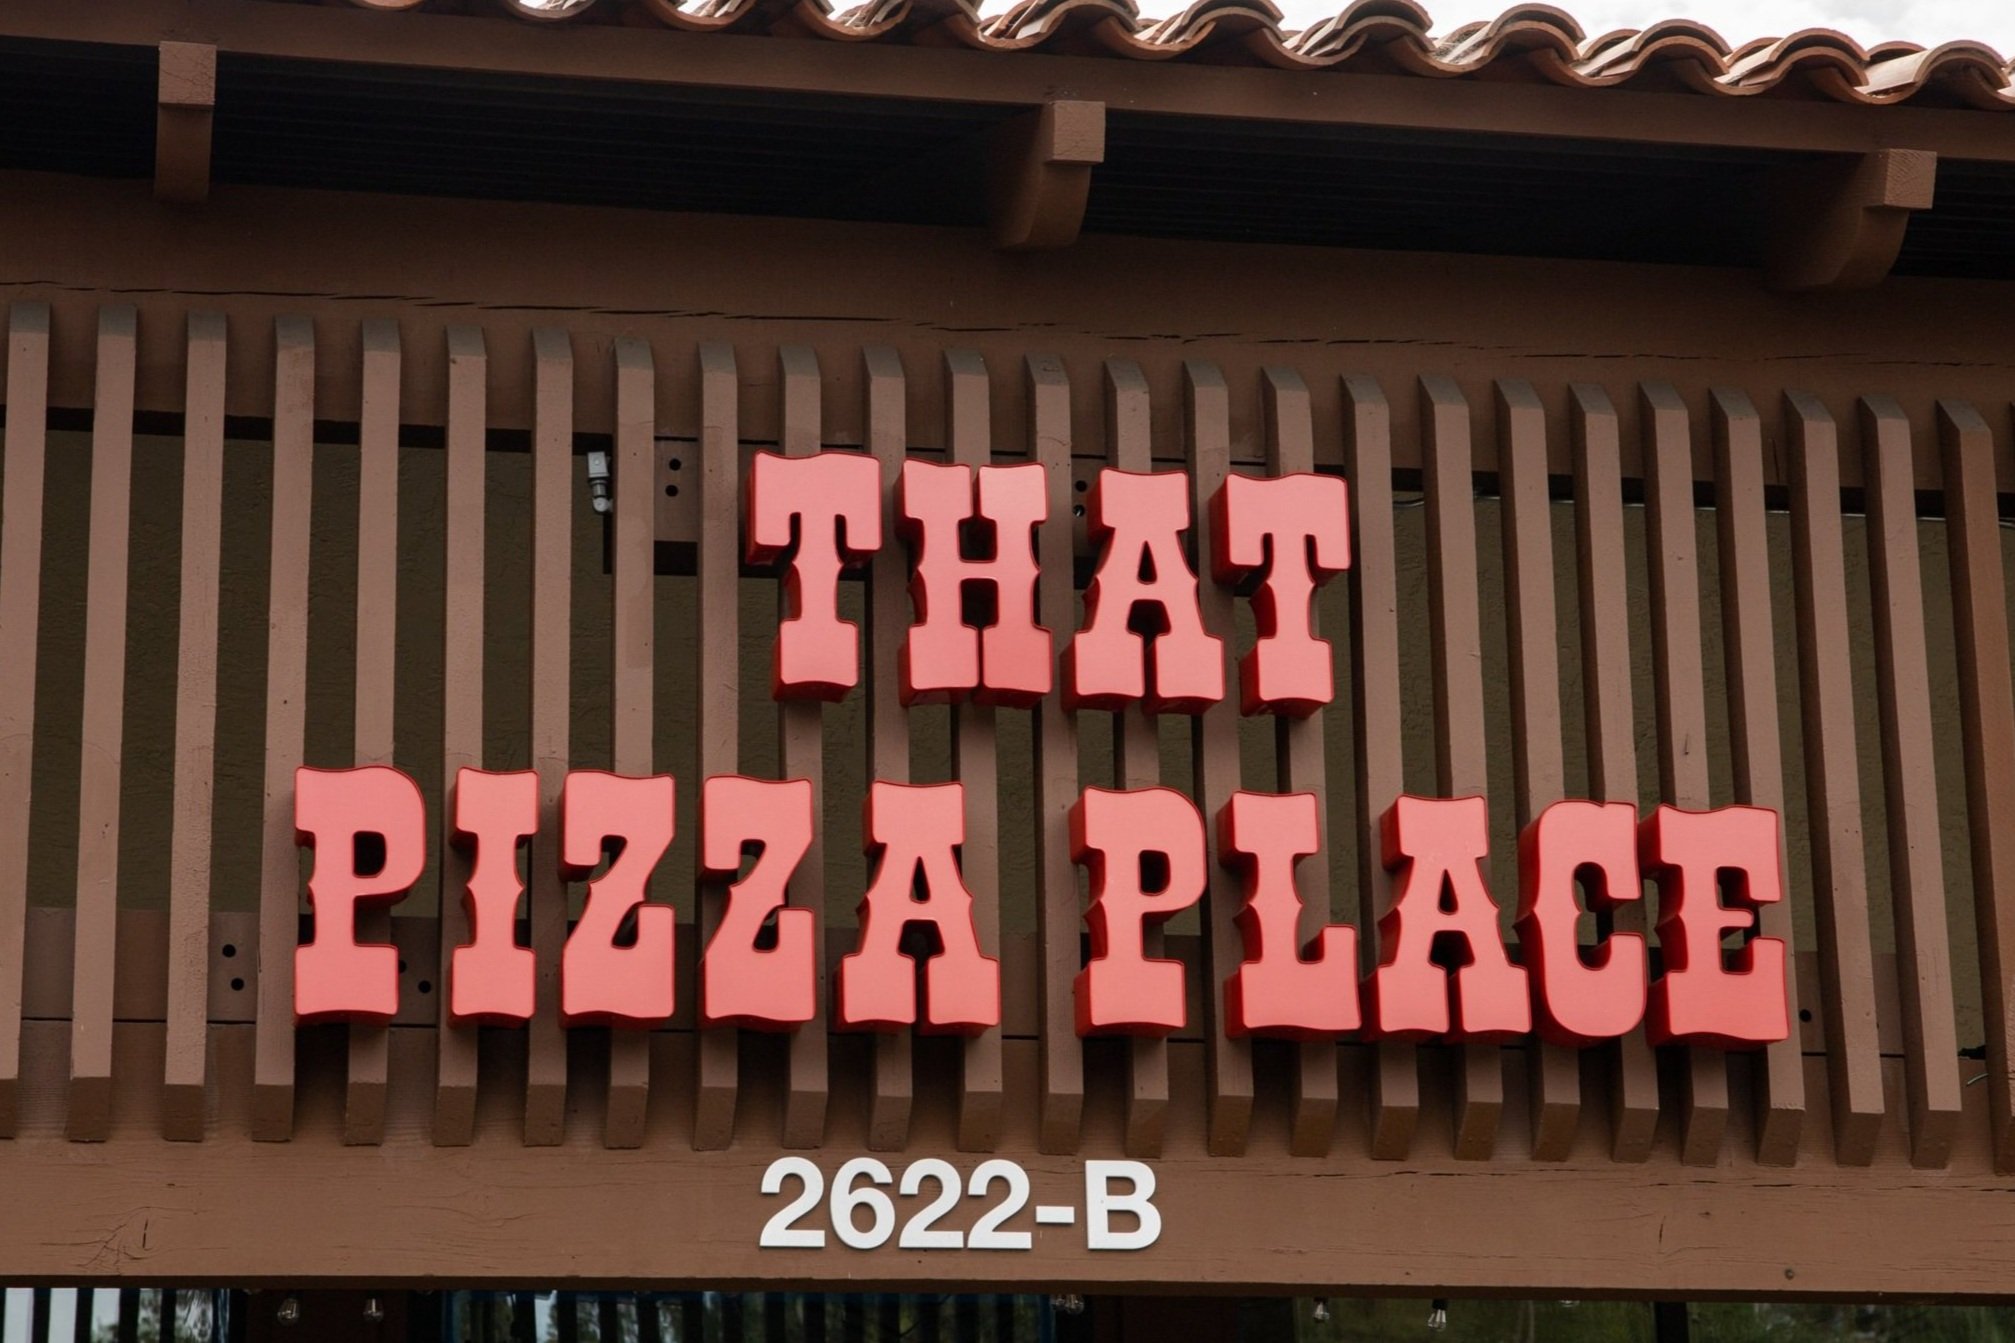 Iconic That Pizza Place is back! - Carlsbad Chamber of Commerce